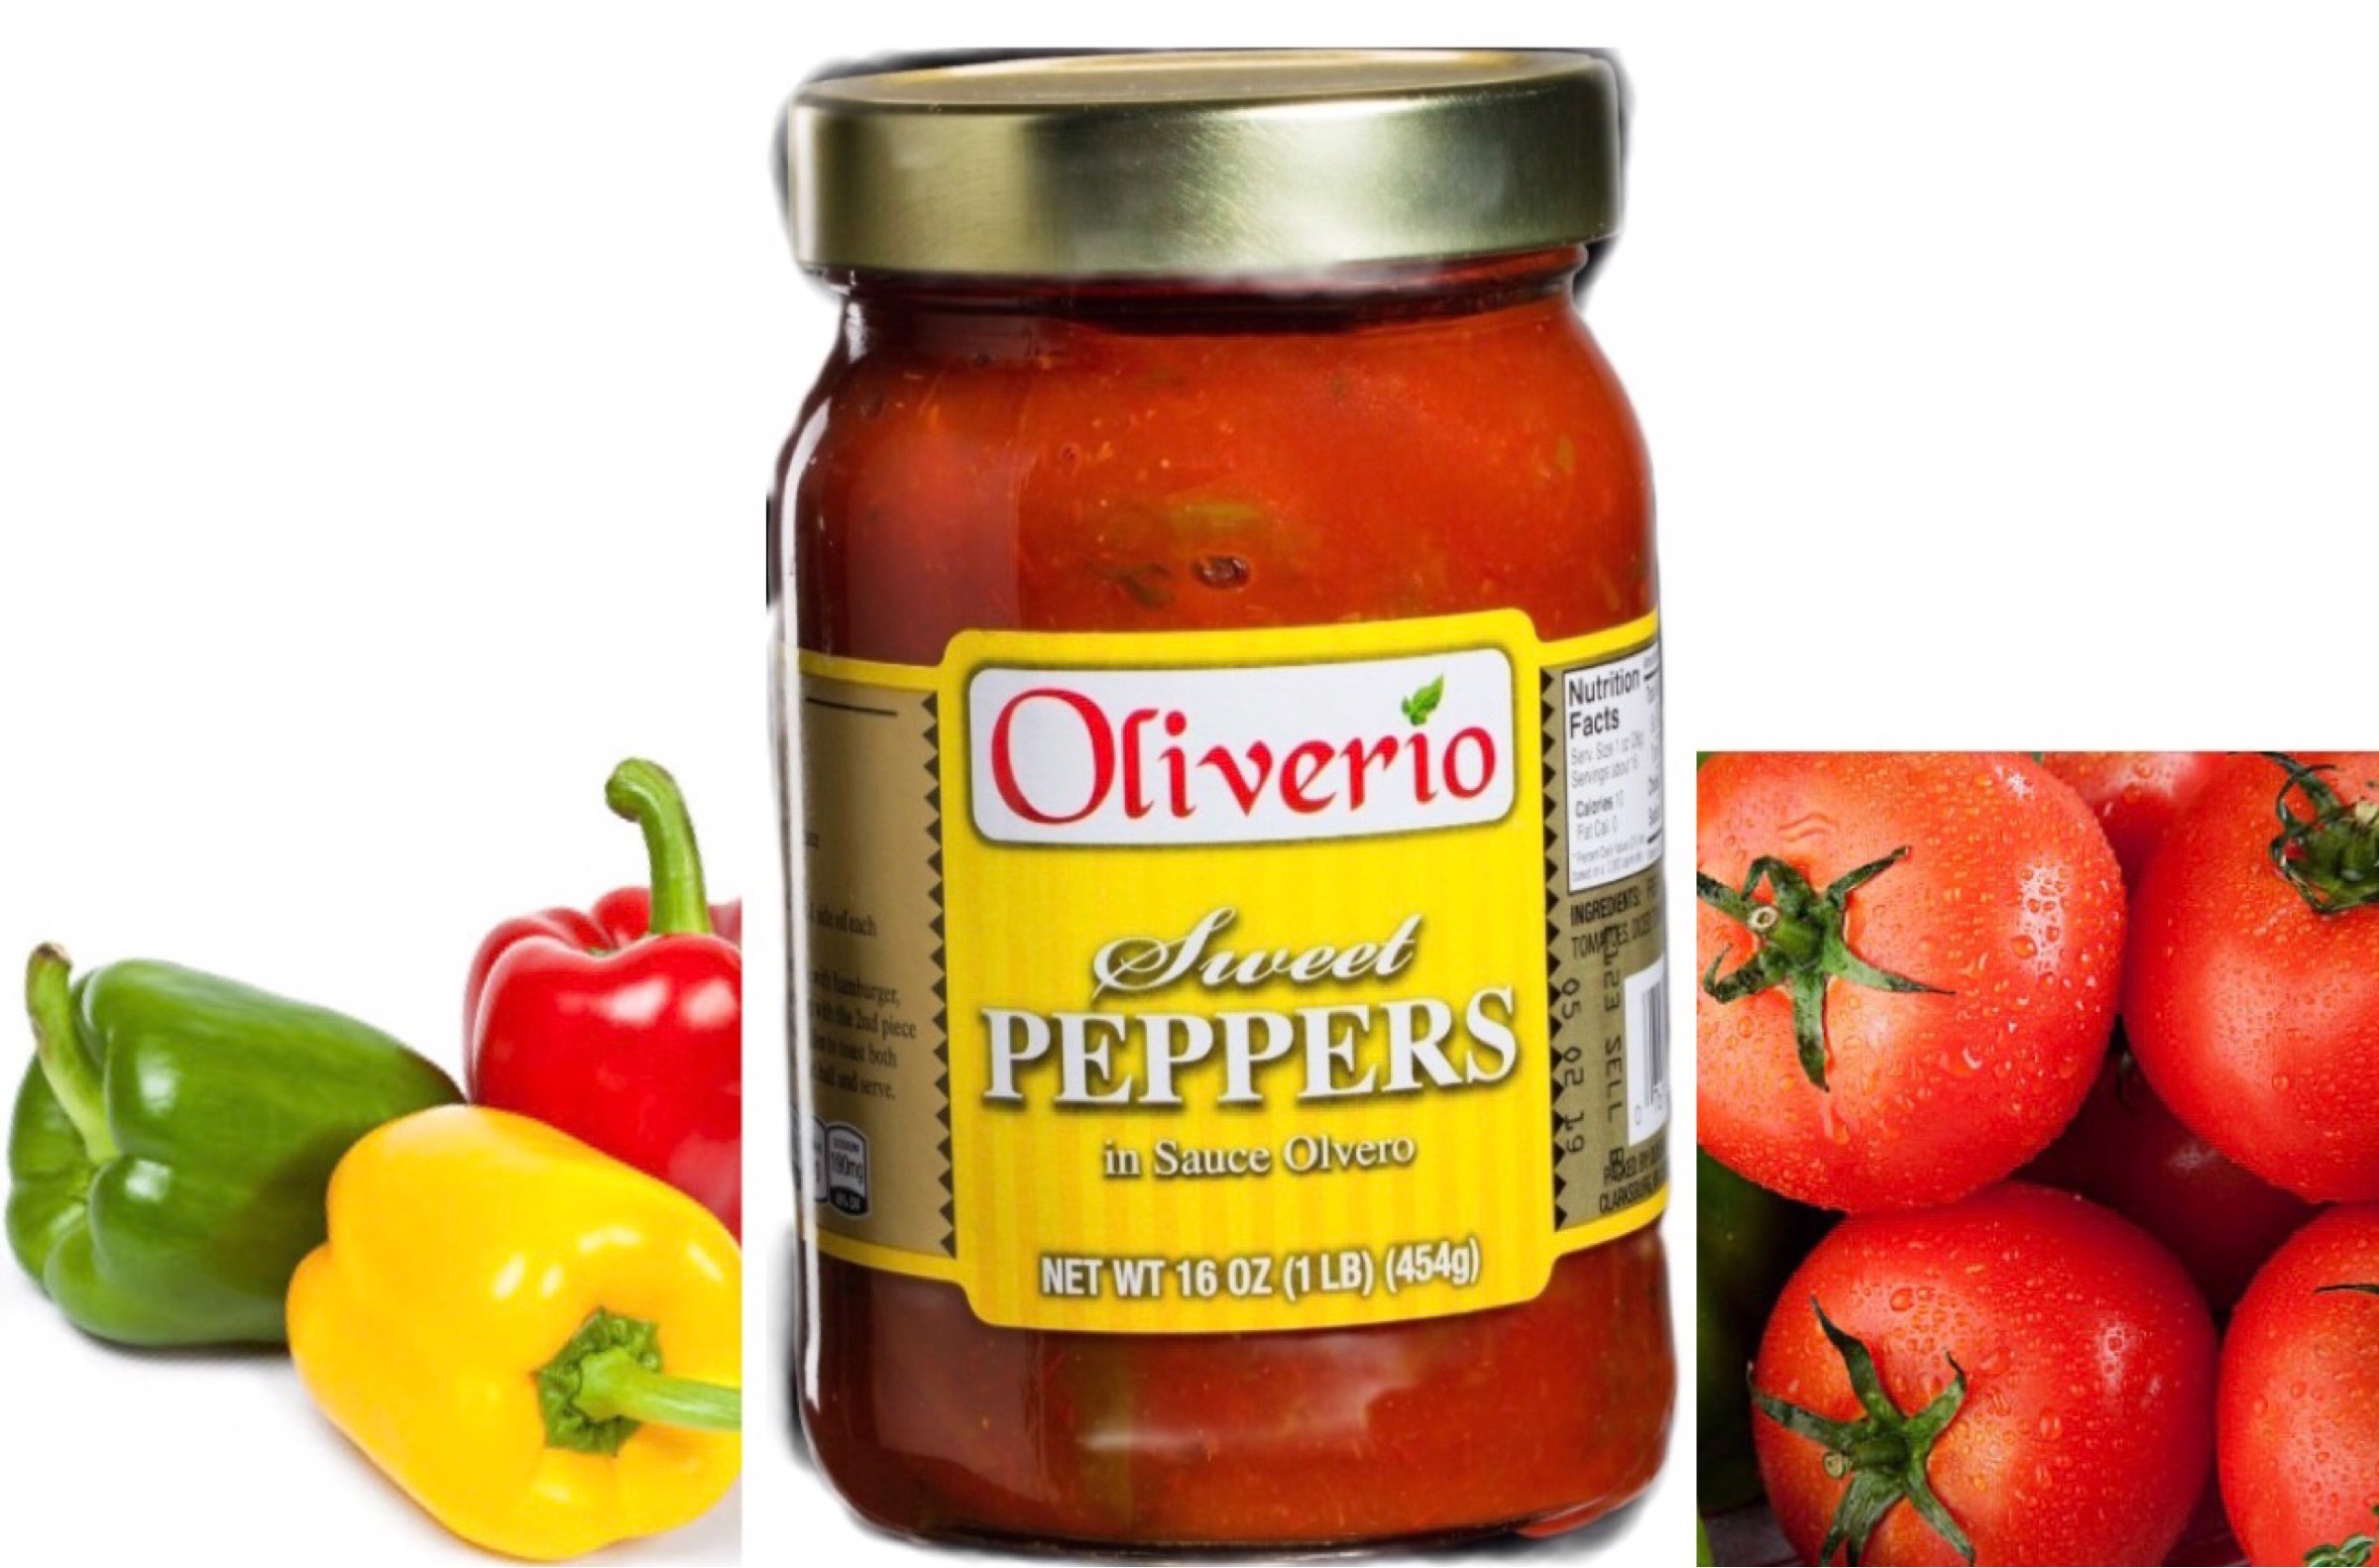 Oliverio Sweet Peppers in Sauce Olivero